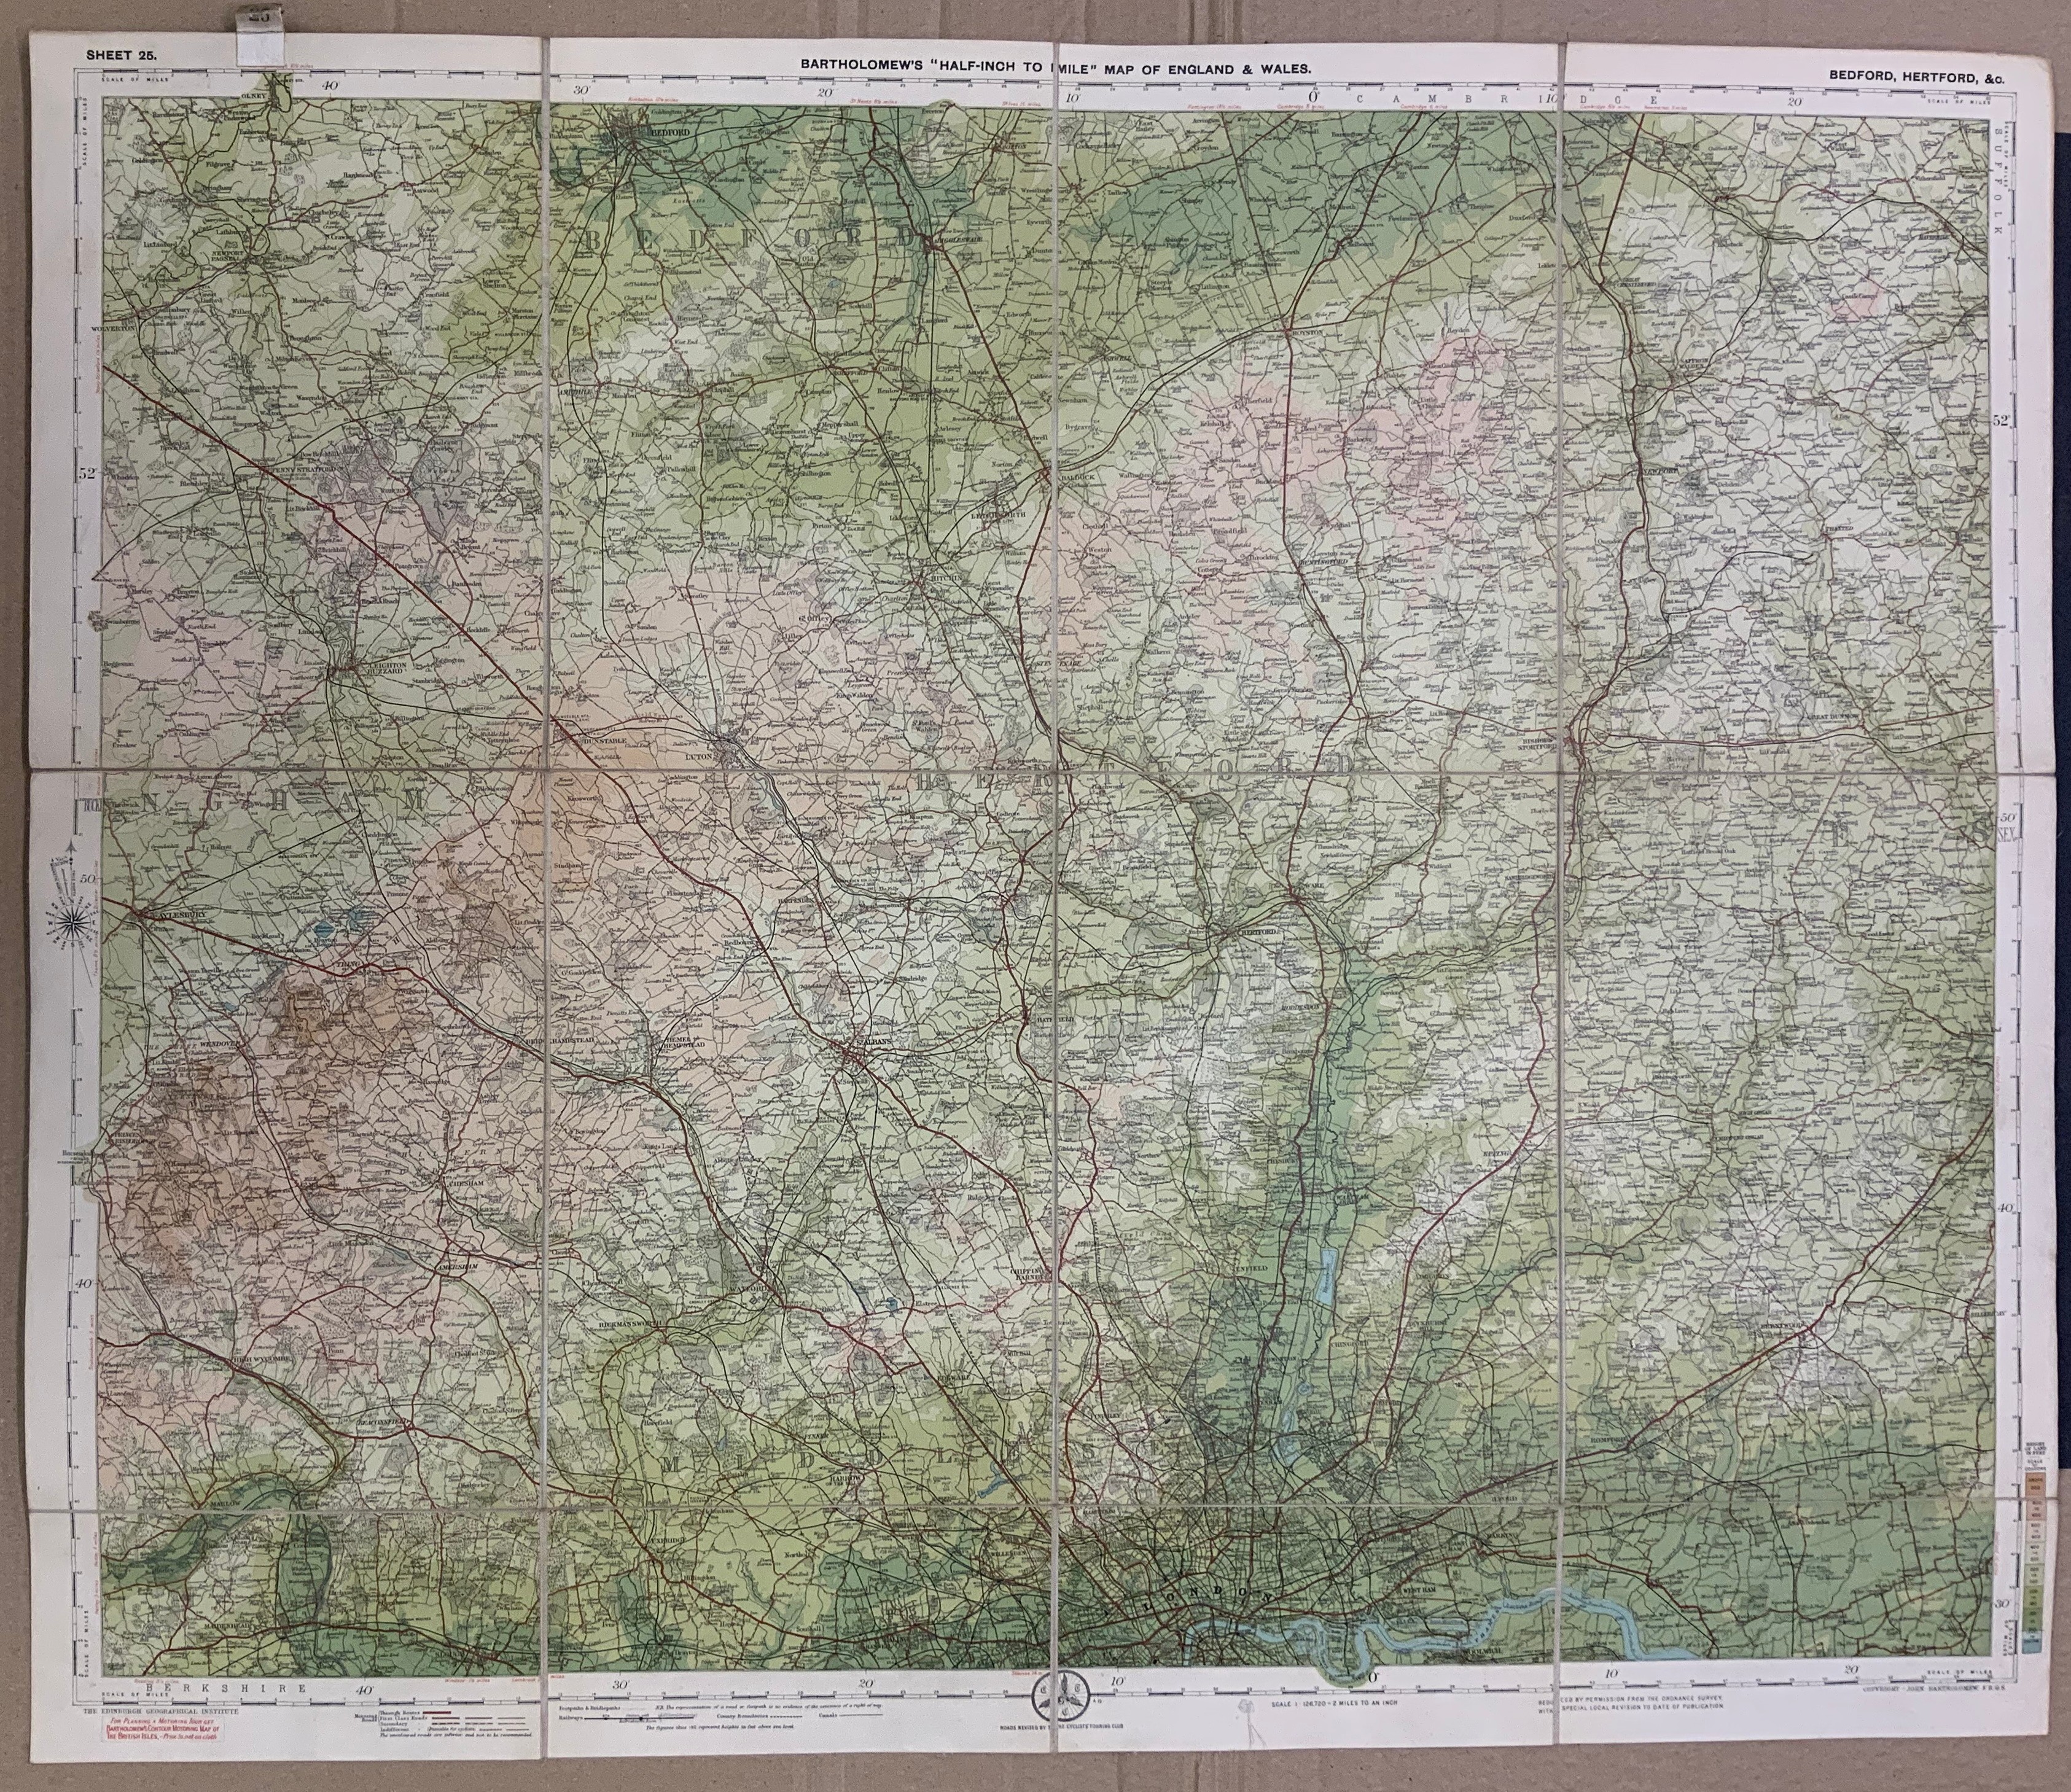 SELECTION OF FIFTEEN BARTHOLOMEW'S A HALF-INCH TO MILE MAPS OF ENGLAND AND WALES (PART 2) - Image 2 of 4